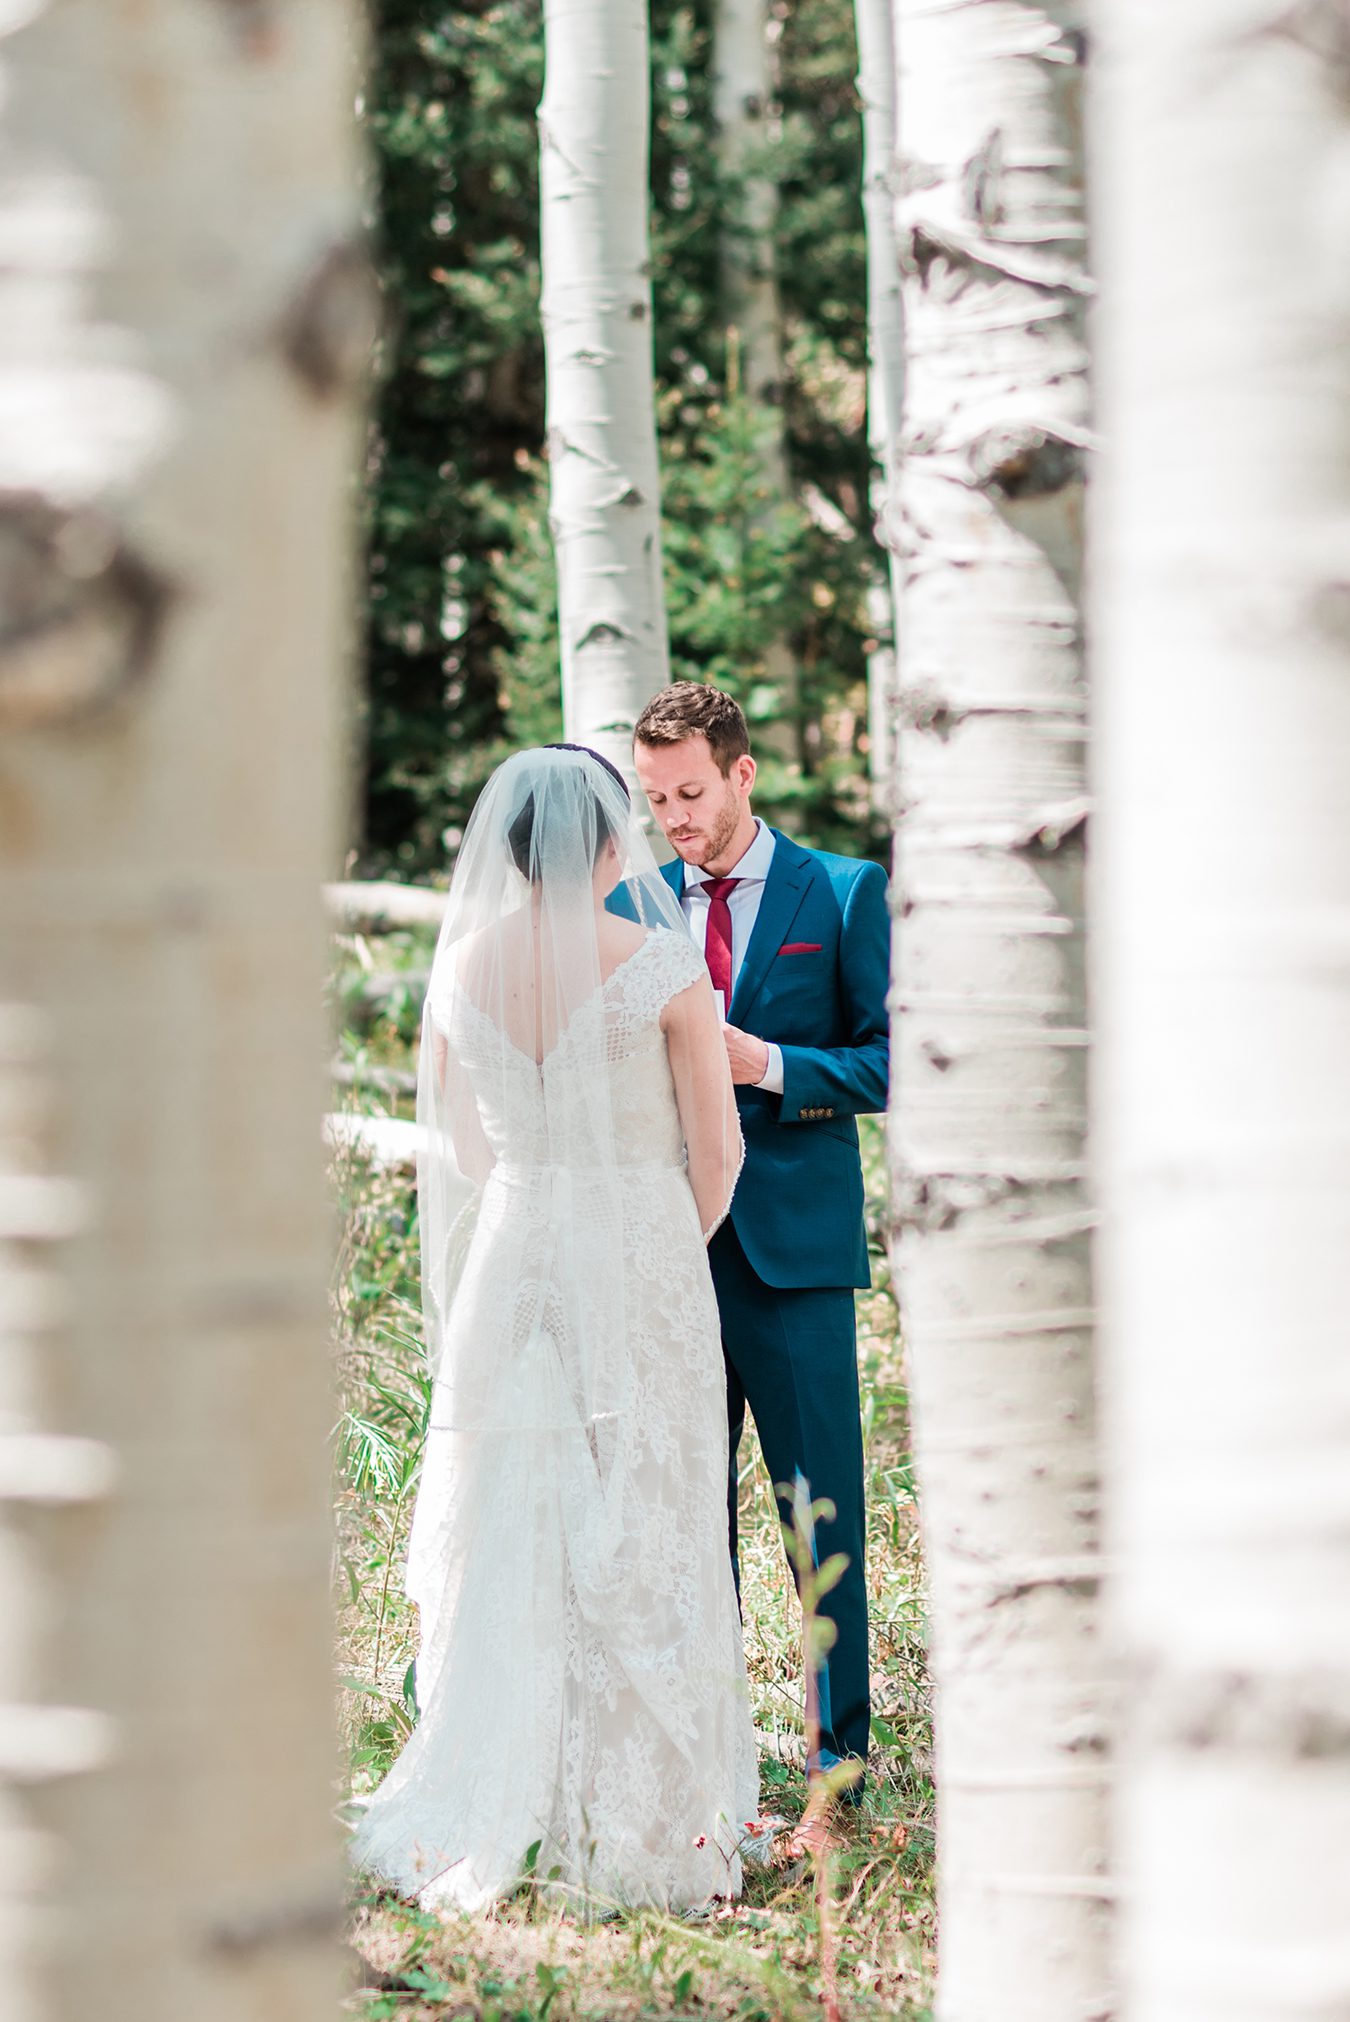 Bride and Groom exchange vows in an aspen grove during their Elopement in Glenwood Springs